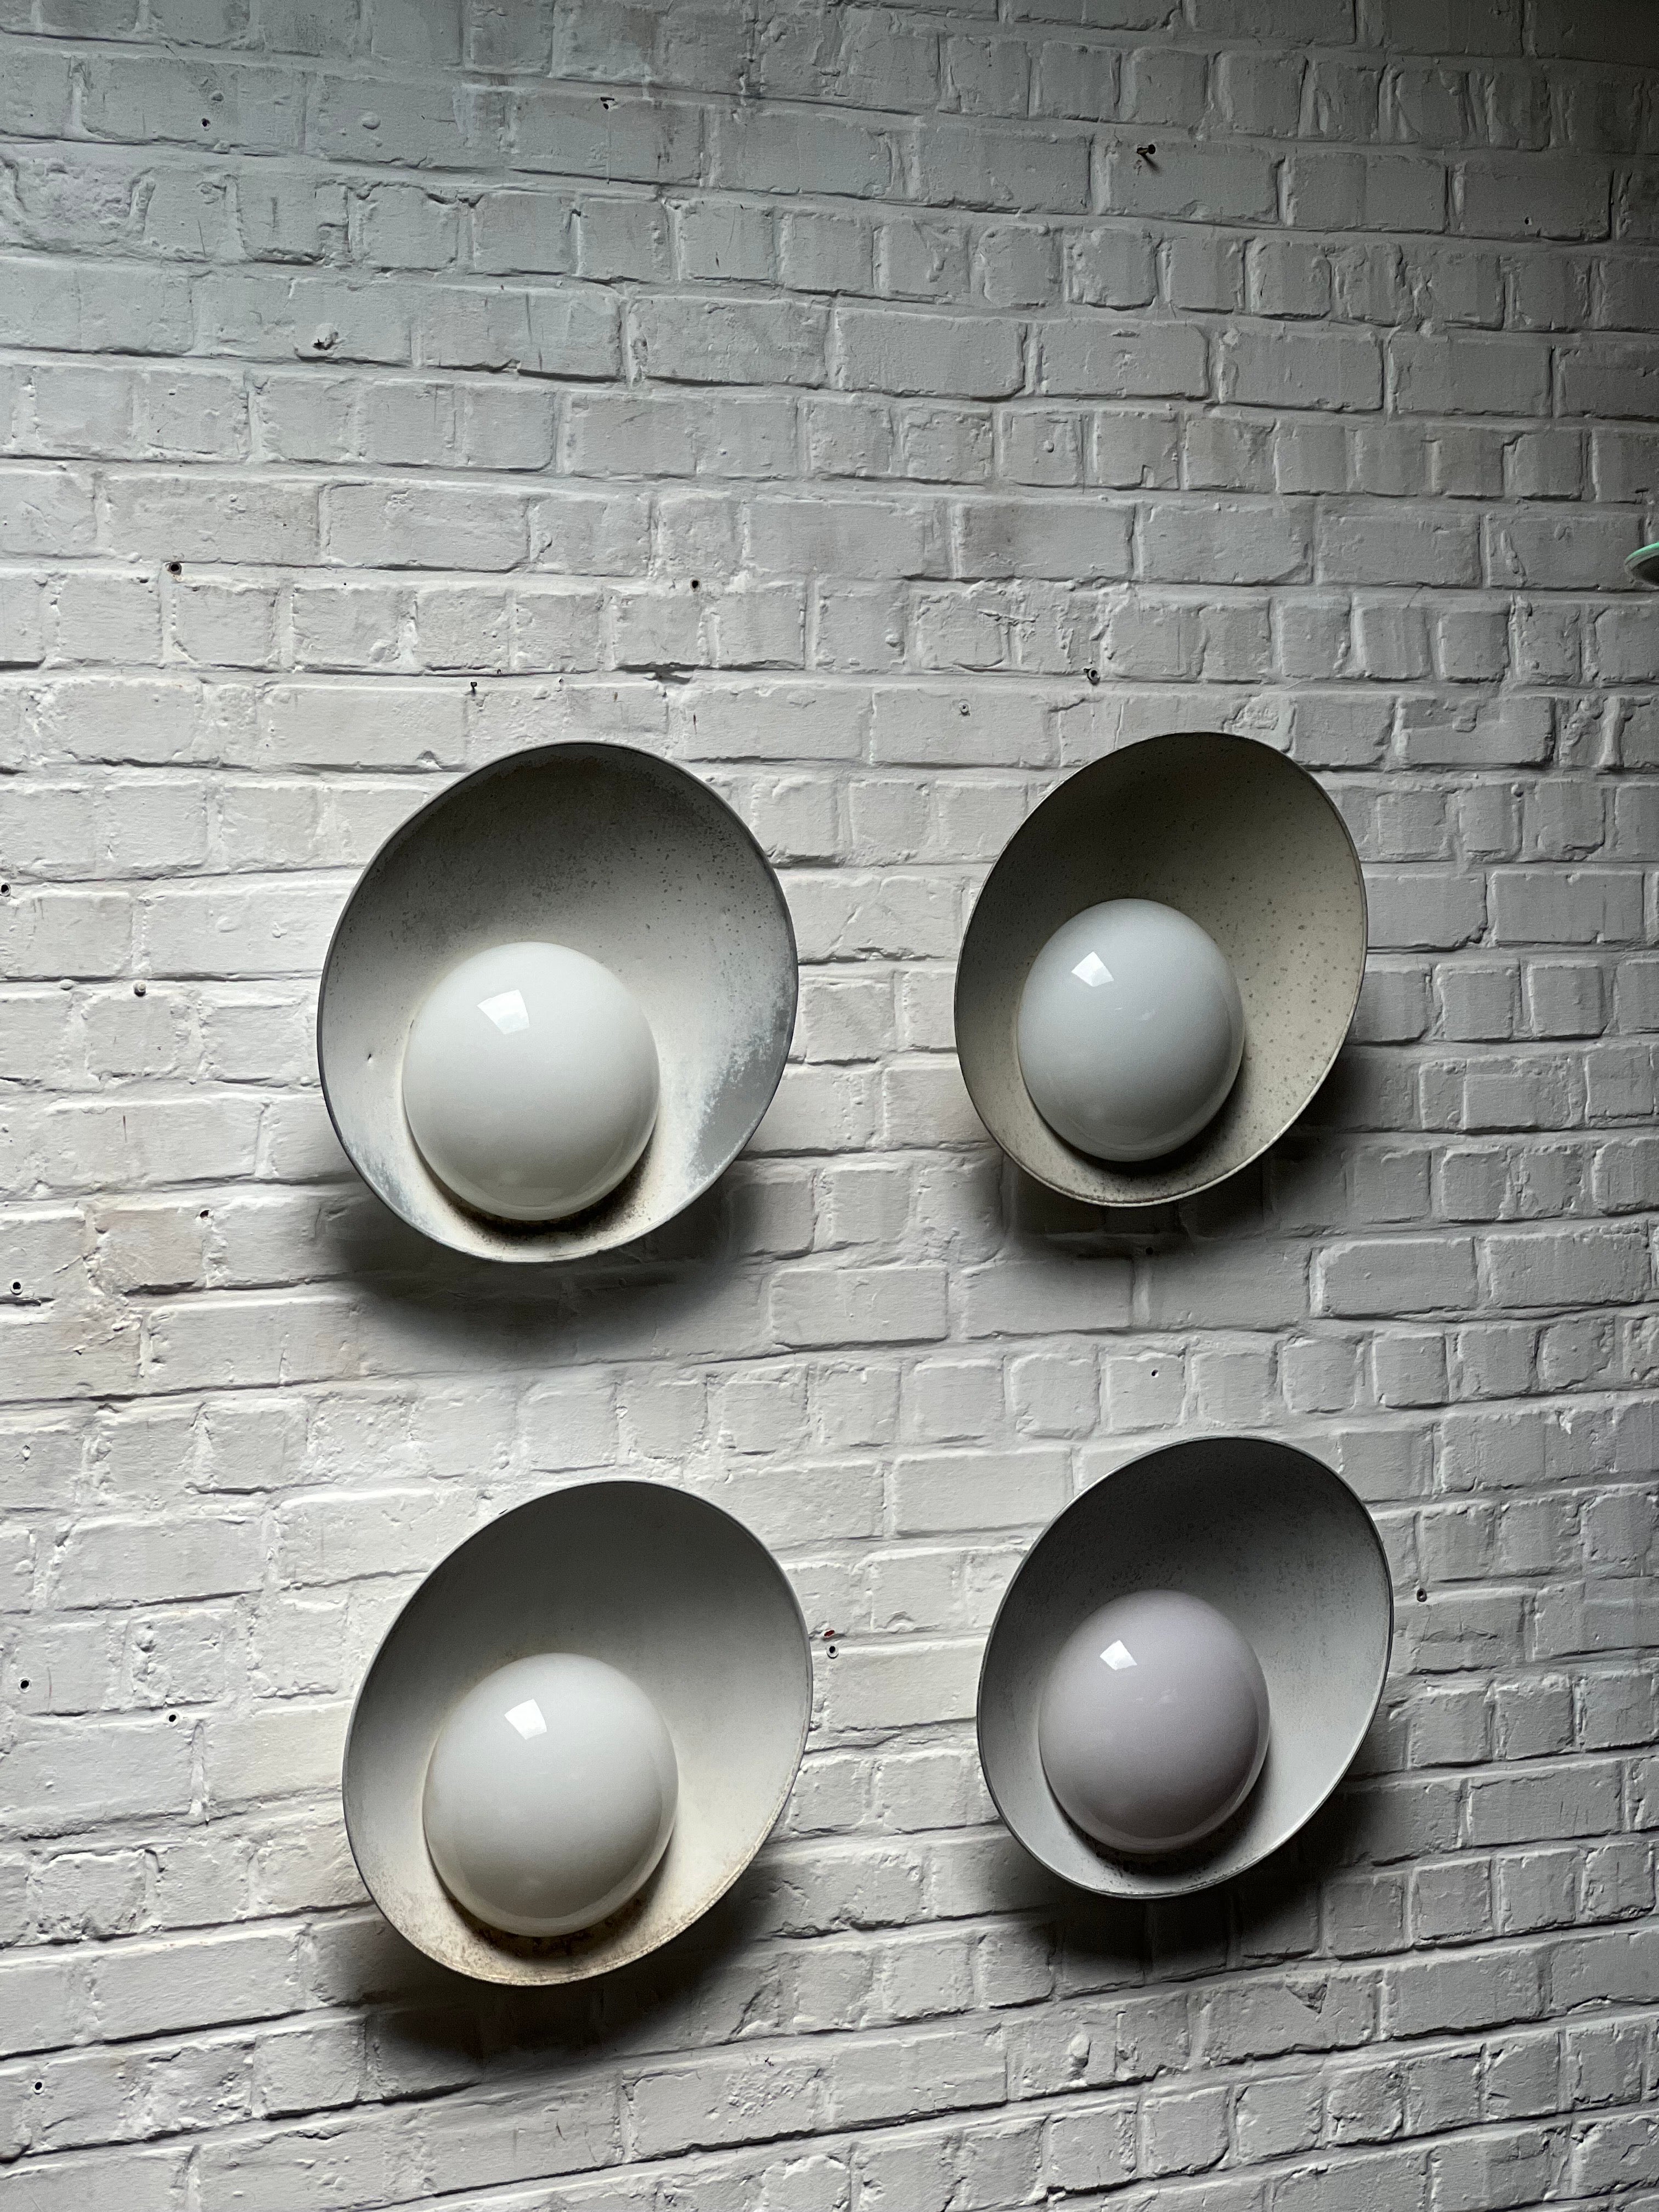 Set of 4 untouched and patinated trough time lamps by master Danish architect Vilhelm Lauritzen. The lamps were designed for the Kastrup airport in Copenhagen (1937-39) and produced by Louis Poulsen. Usually they are repainted white but these are